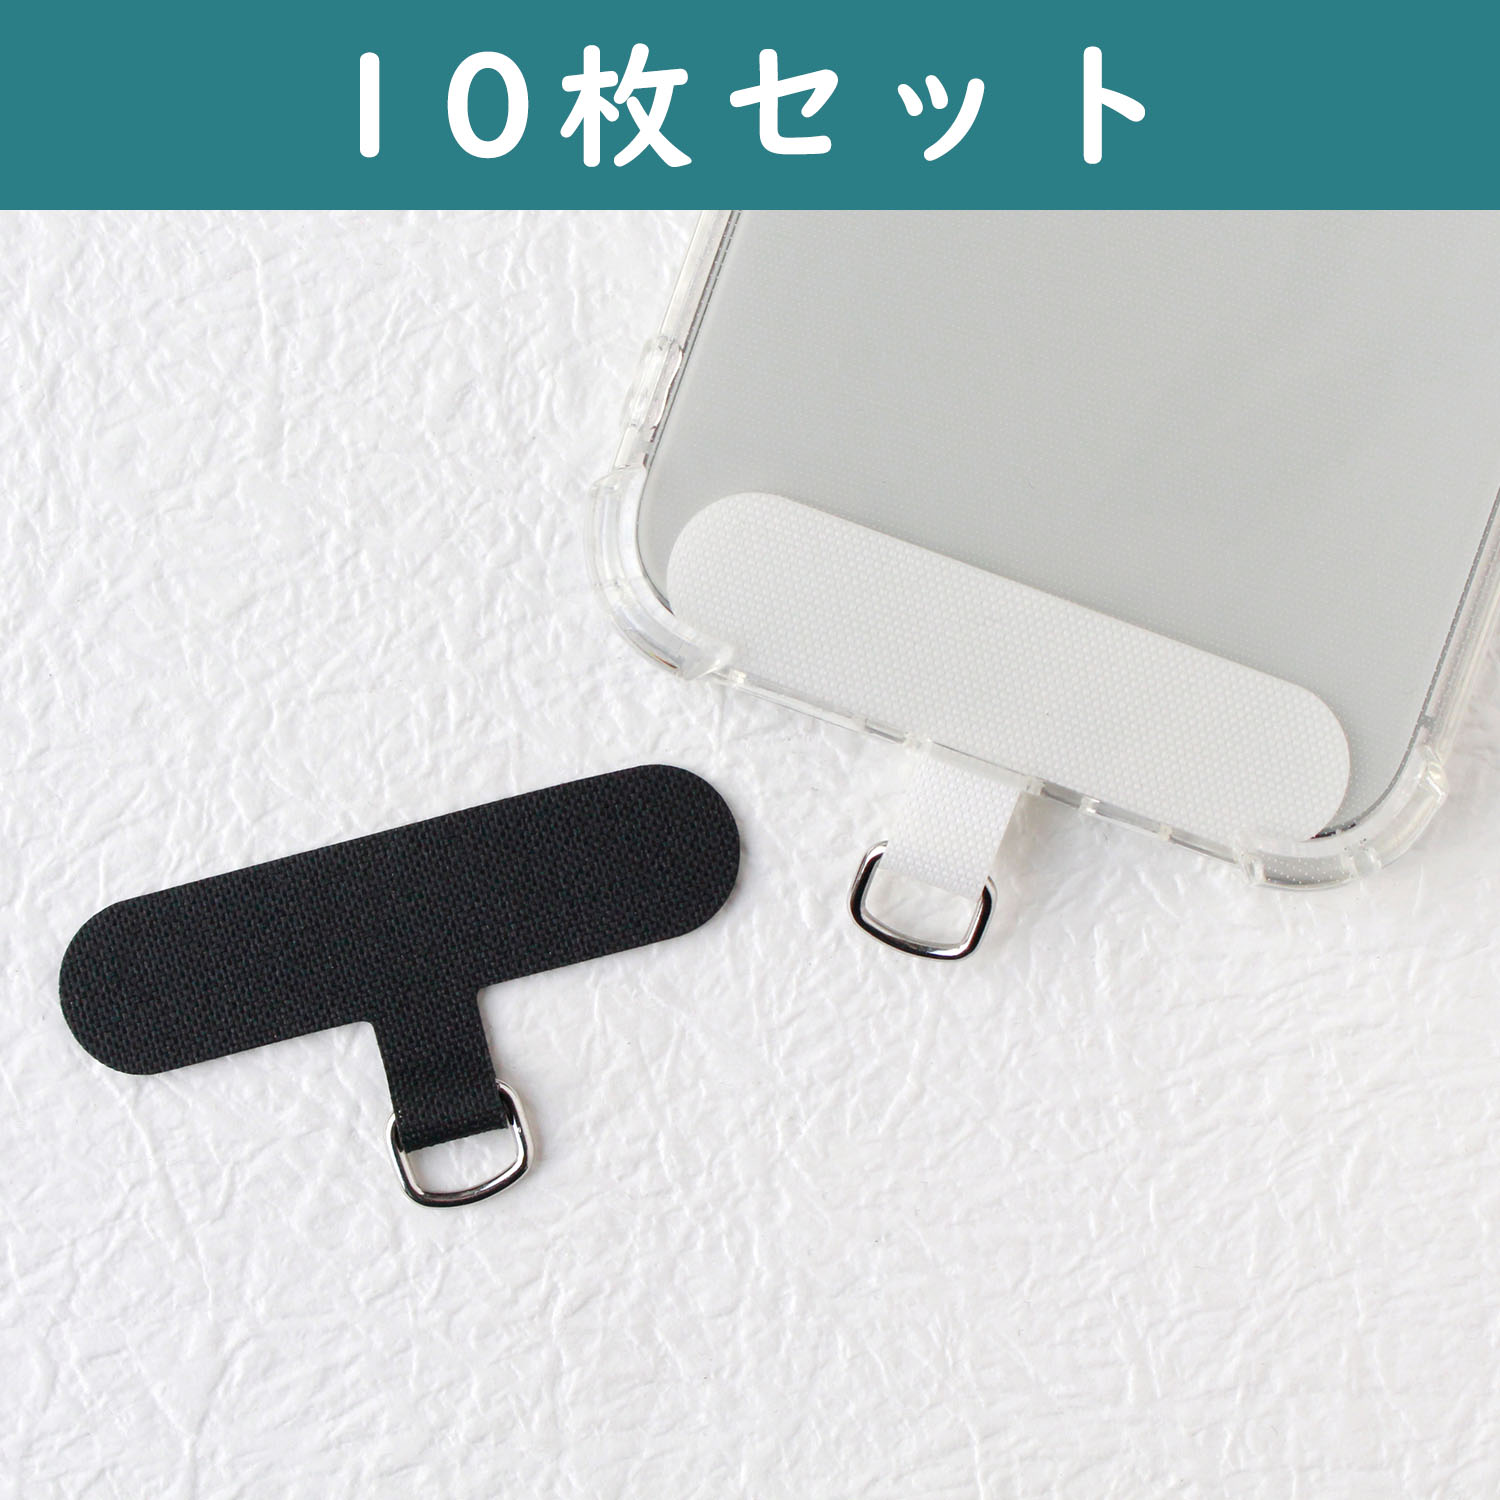 SS-10 Smartphone strap holder parts", D-can type 10pcs (bag)